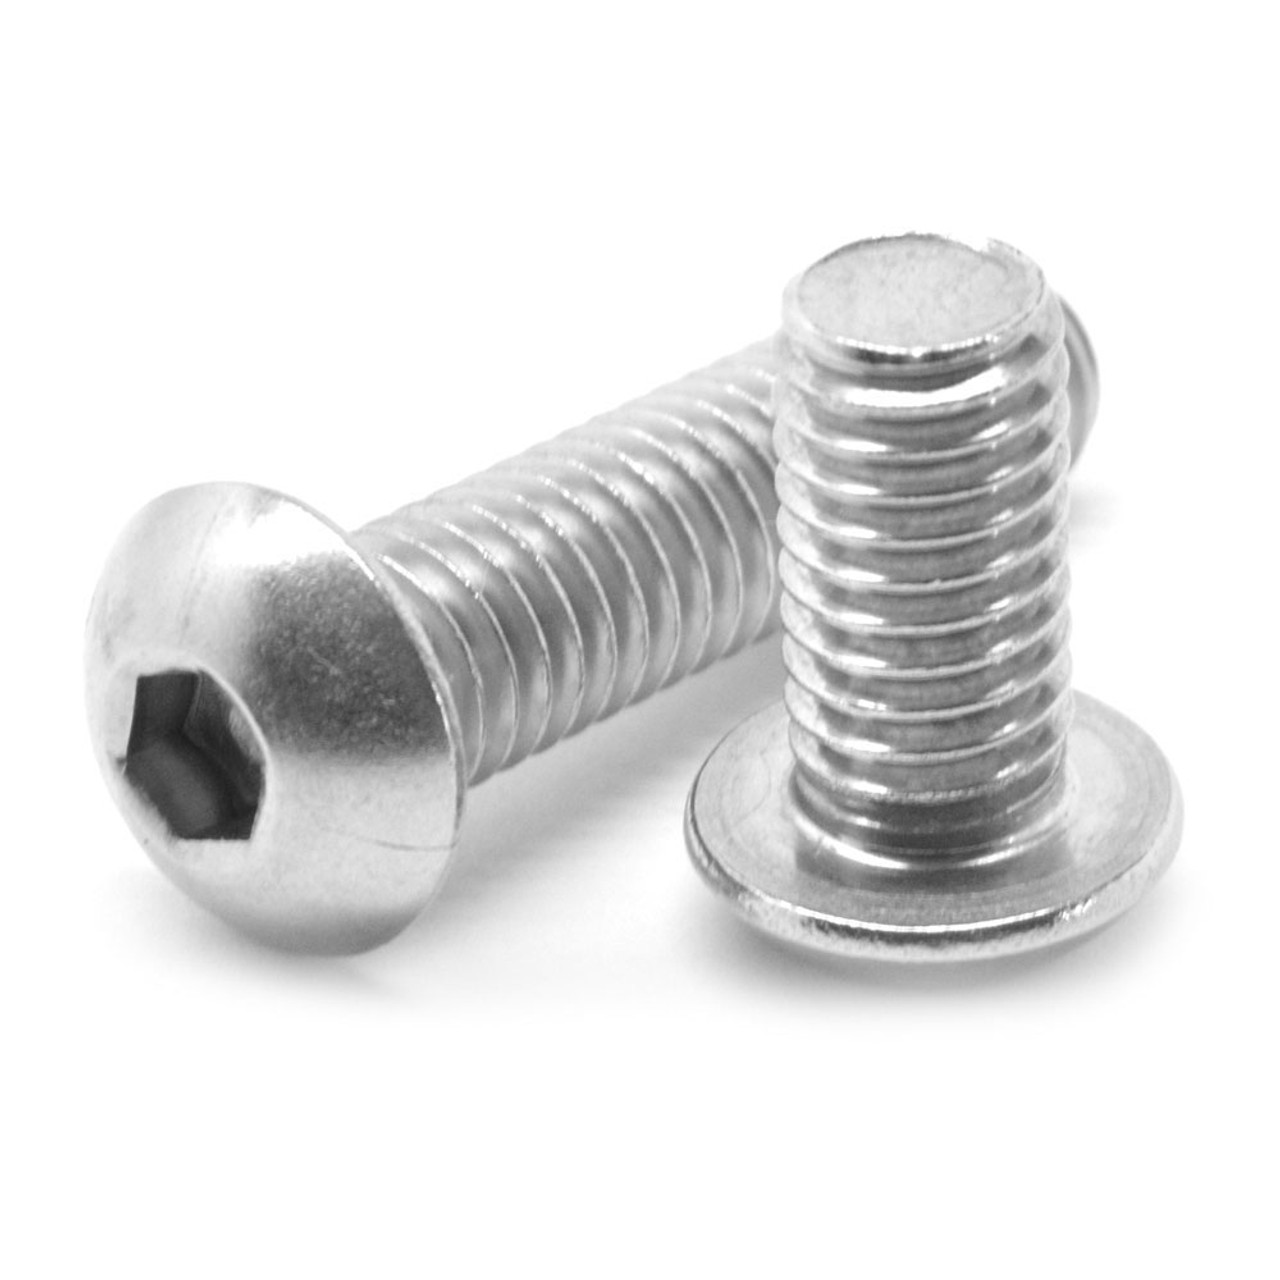 M12 x 1.75 x 70 MM (FT) Coarse Thread ISO 7380 Socket Button Head Cap Screw Stainless Steel 18-8